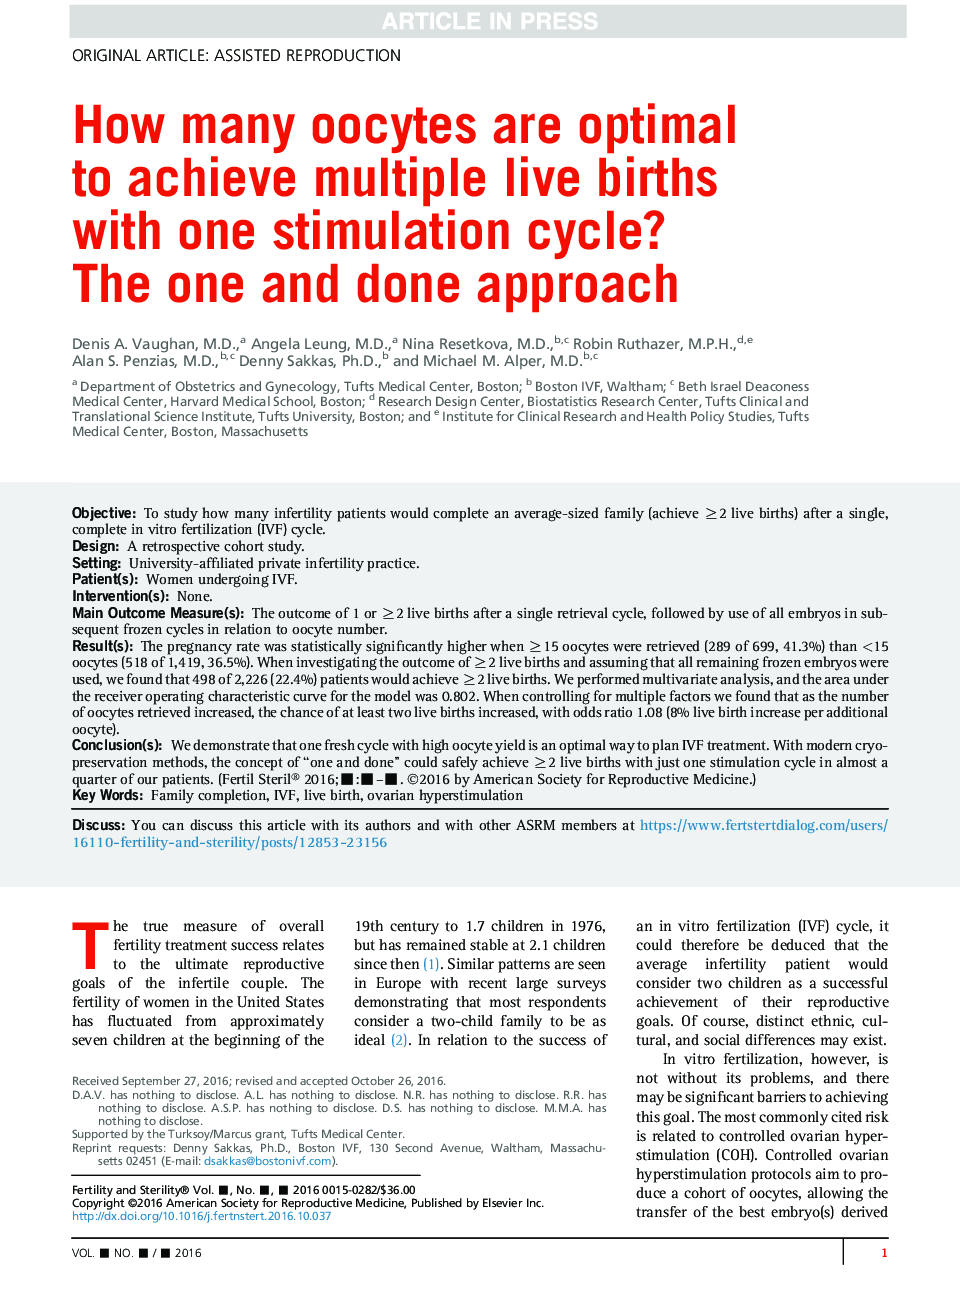 How many oocytes are optimal toÂ achieve multiple live births withÂ one stimulation cycle? TheÂ one-and-done approach